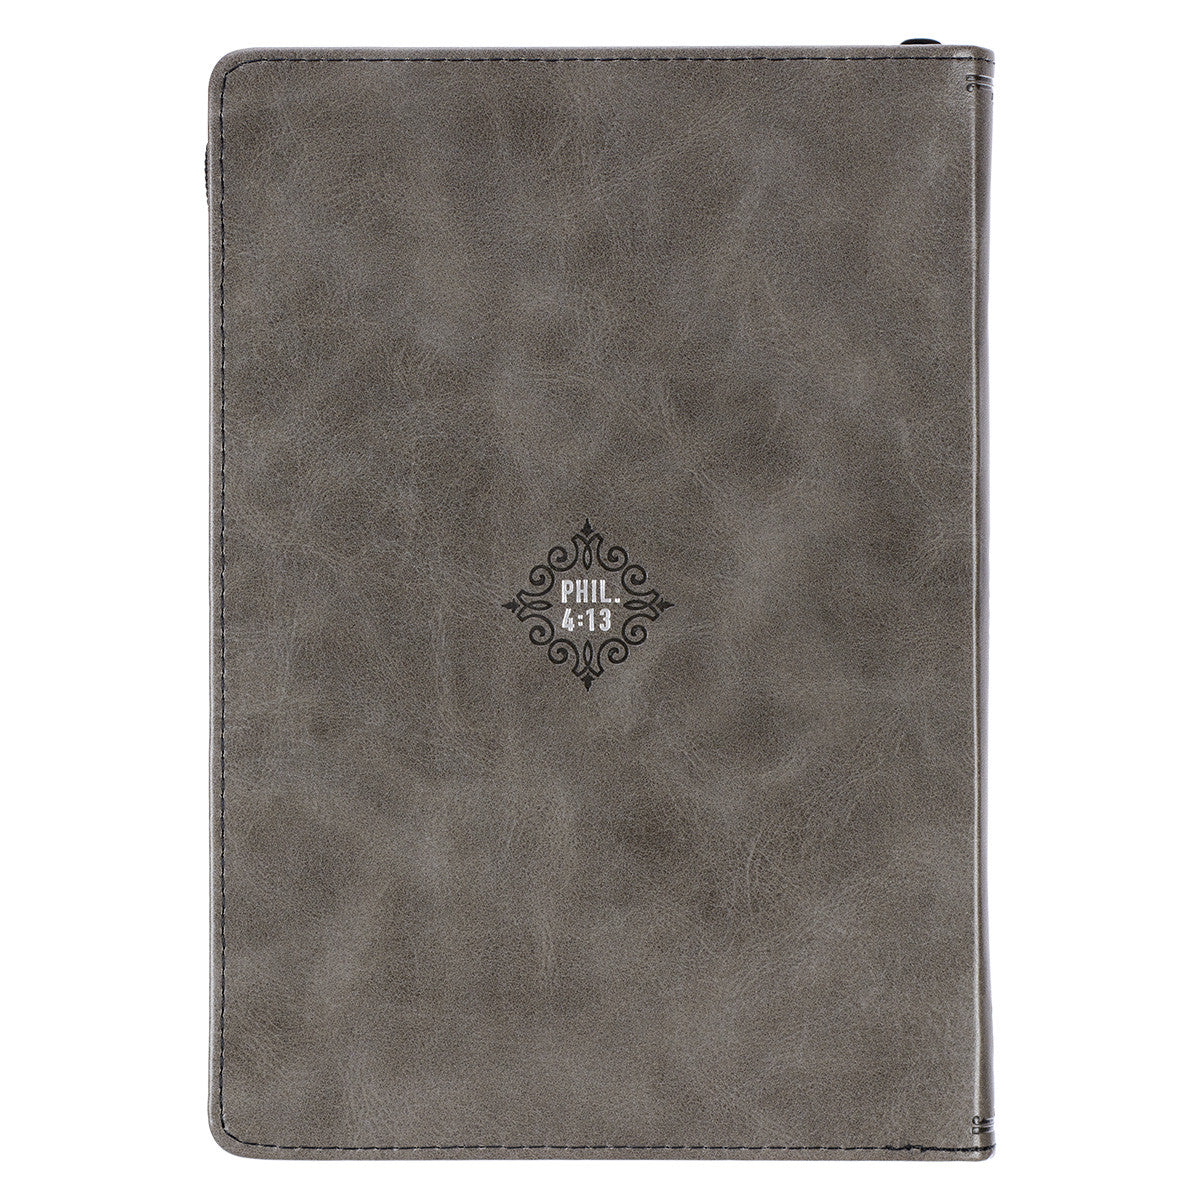 All Things Through Christ Grey Faux Leather Classic Journal with Zipper Closure - Philippians 4:13 - The Christian Gift Company